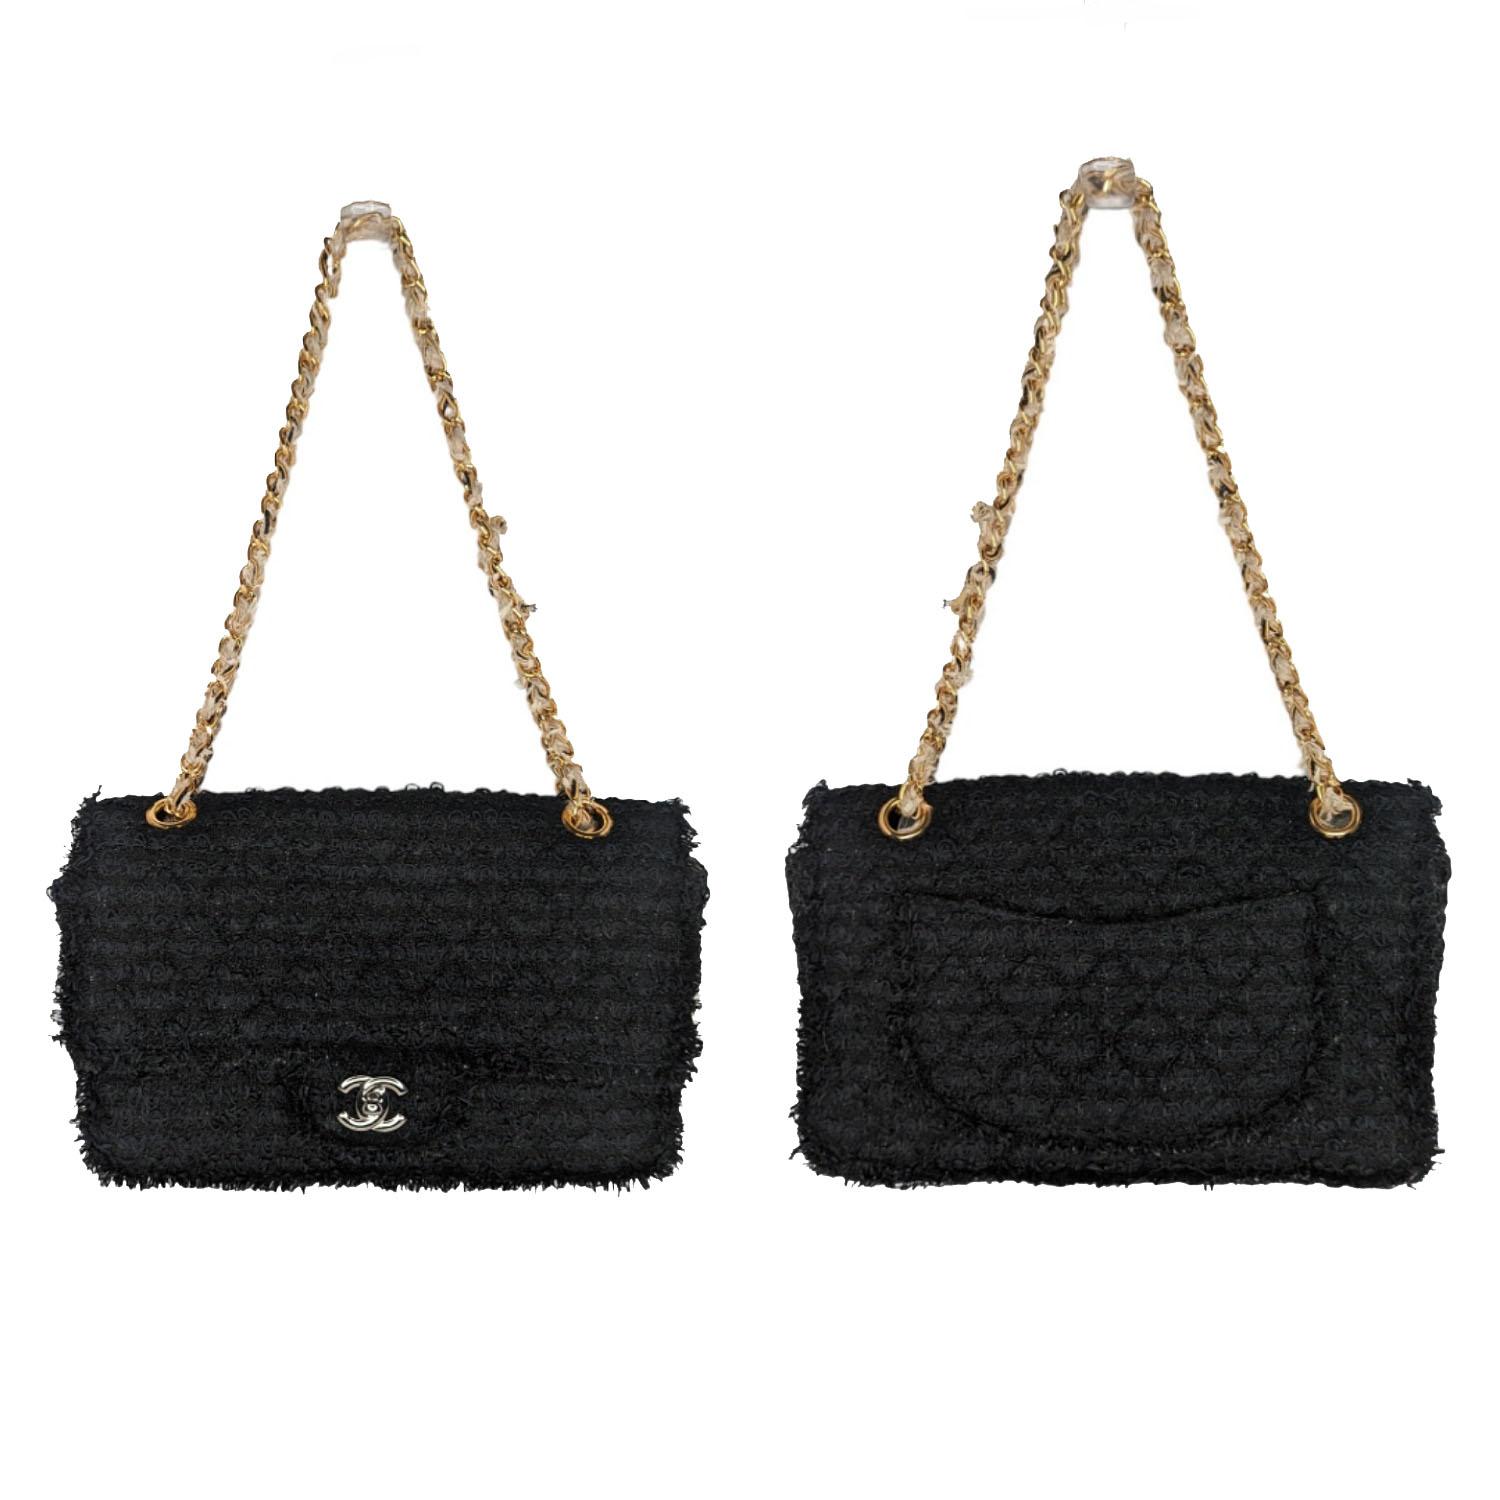 Chanel Tweed Matelasse Medium Flap Bag crafted of black woven tweed with gold-tone and gunmetal hardware, exterior patch pocket, CC turn-lock closure, white tweed and chain-link threaded strap, fine textile interior with a zipper and flat